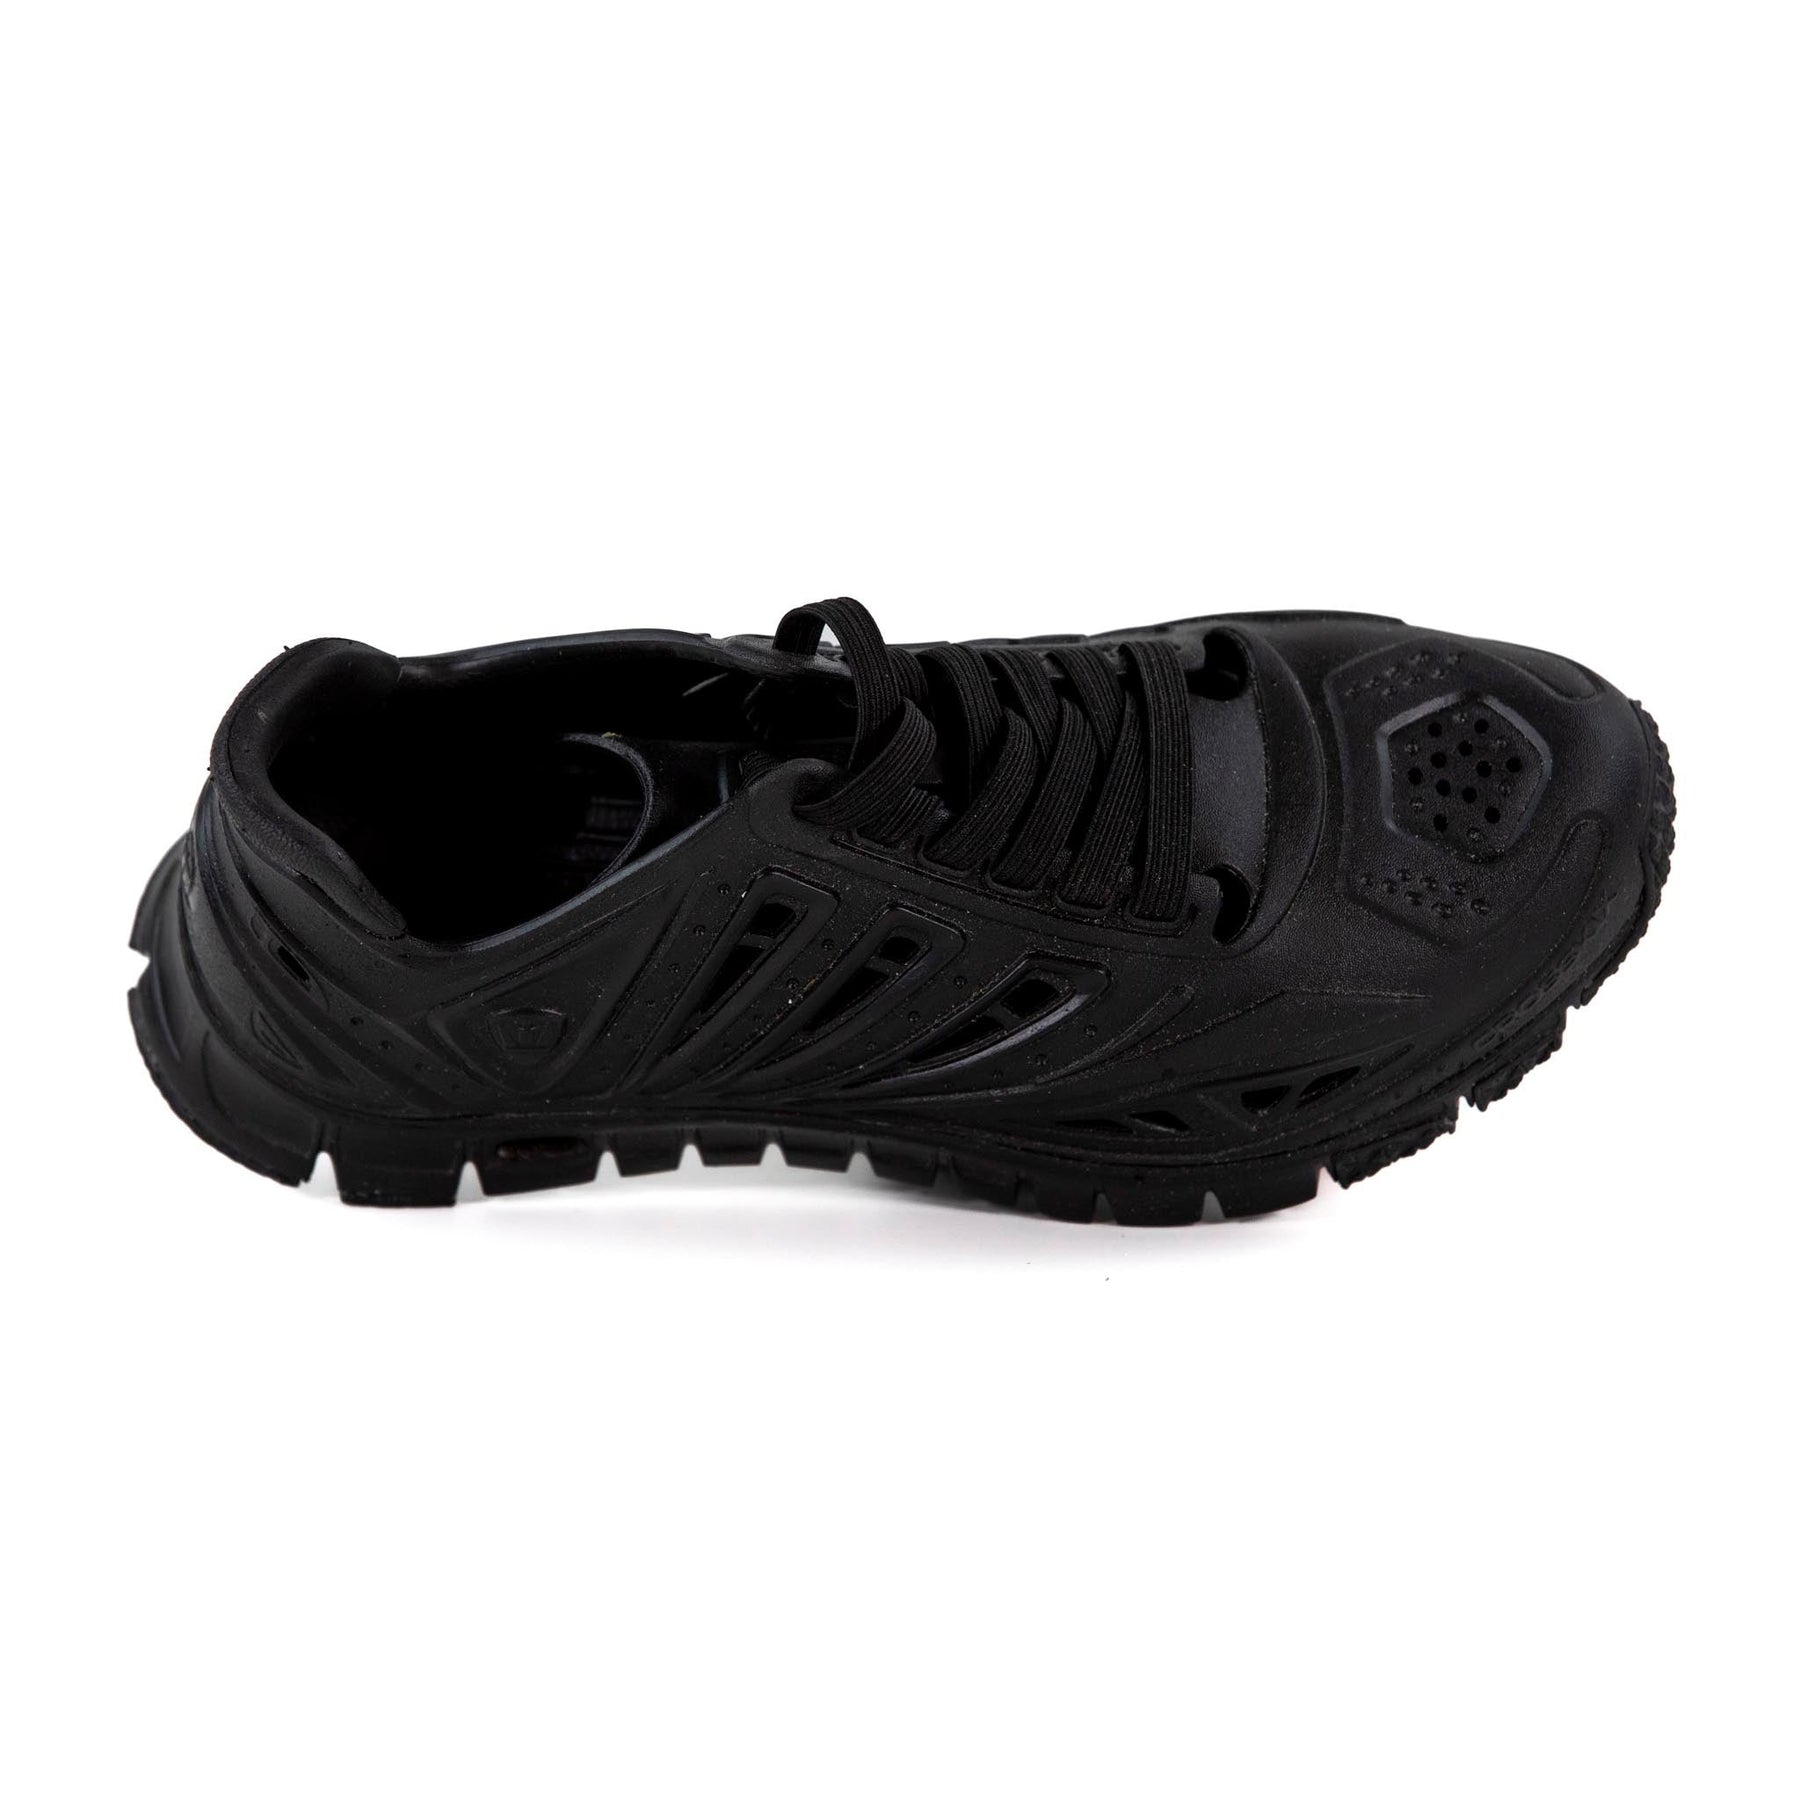 APX Closed Toe Lace Up Water Shoes for Men by CROSSKIX - Sportsman Gear